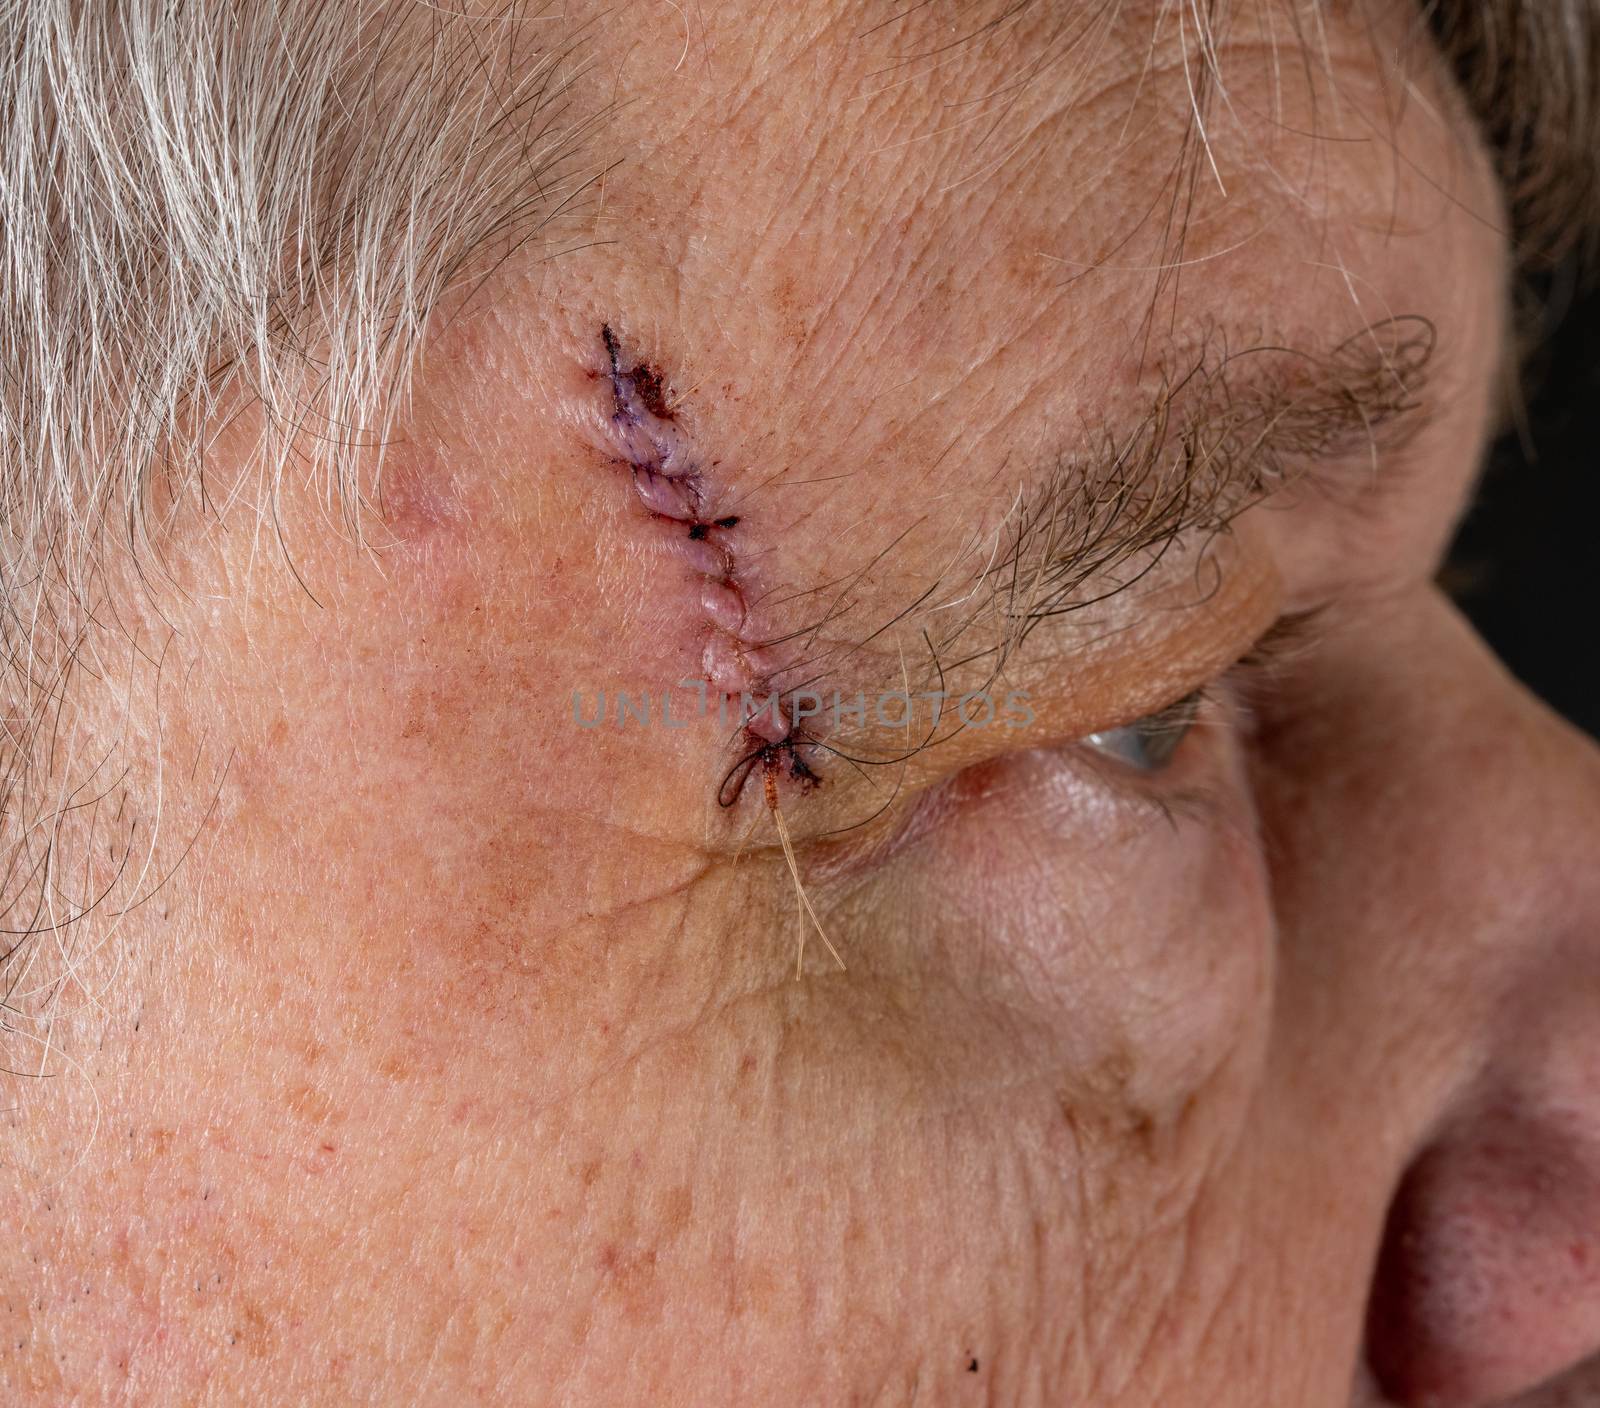 Side view of senior man after MOHS surgery to remove skin cancer stitches in wound by steheap